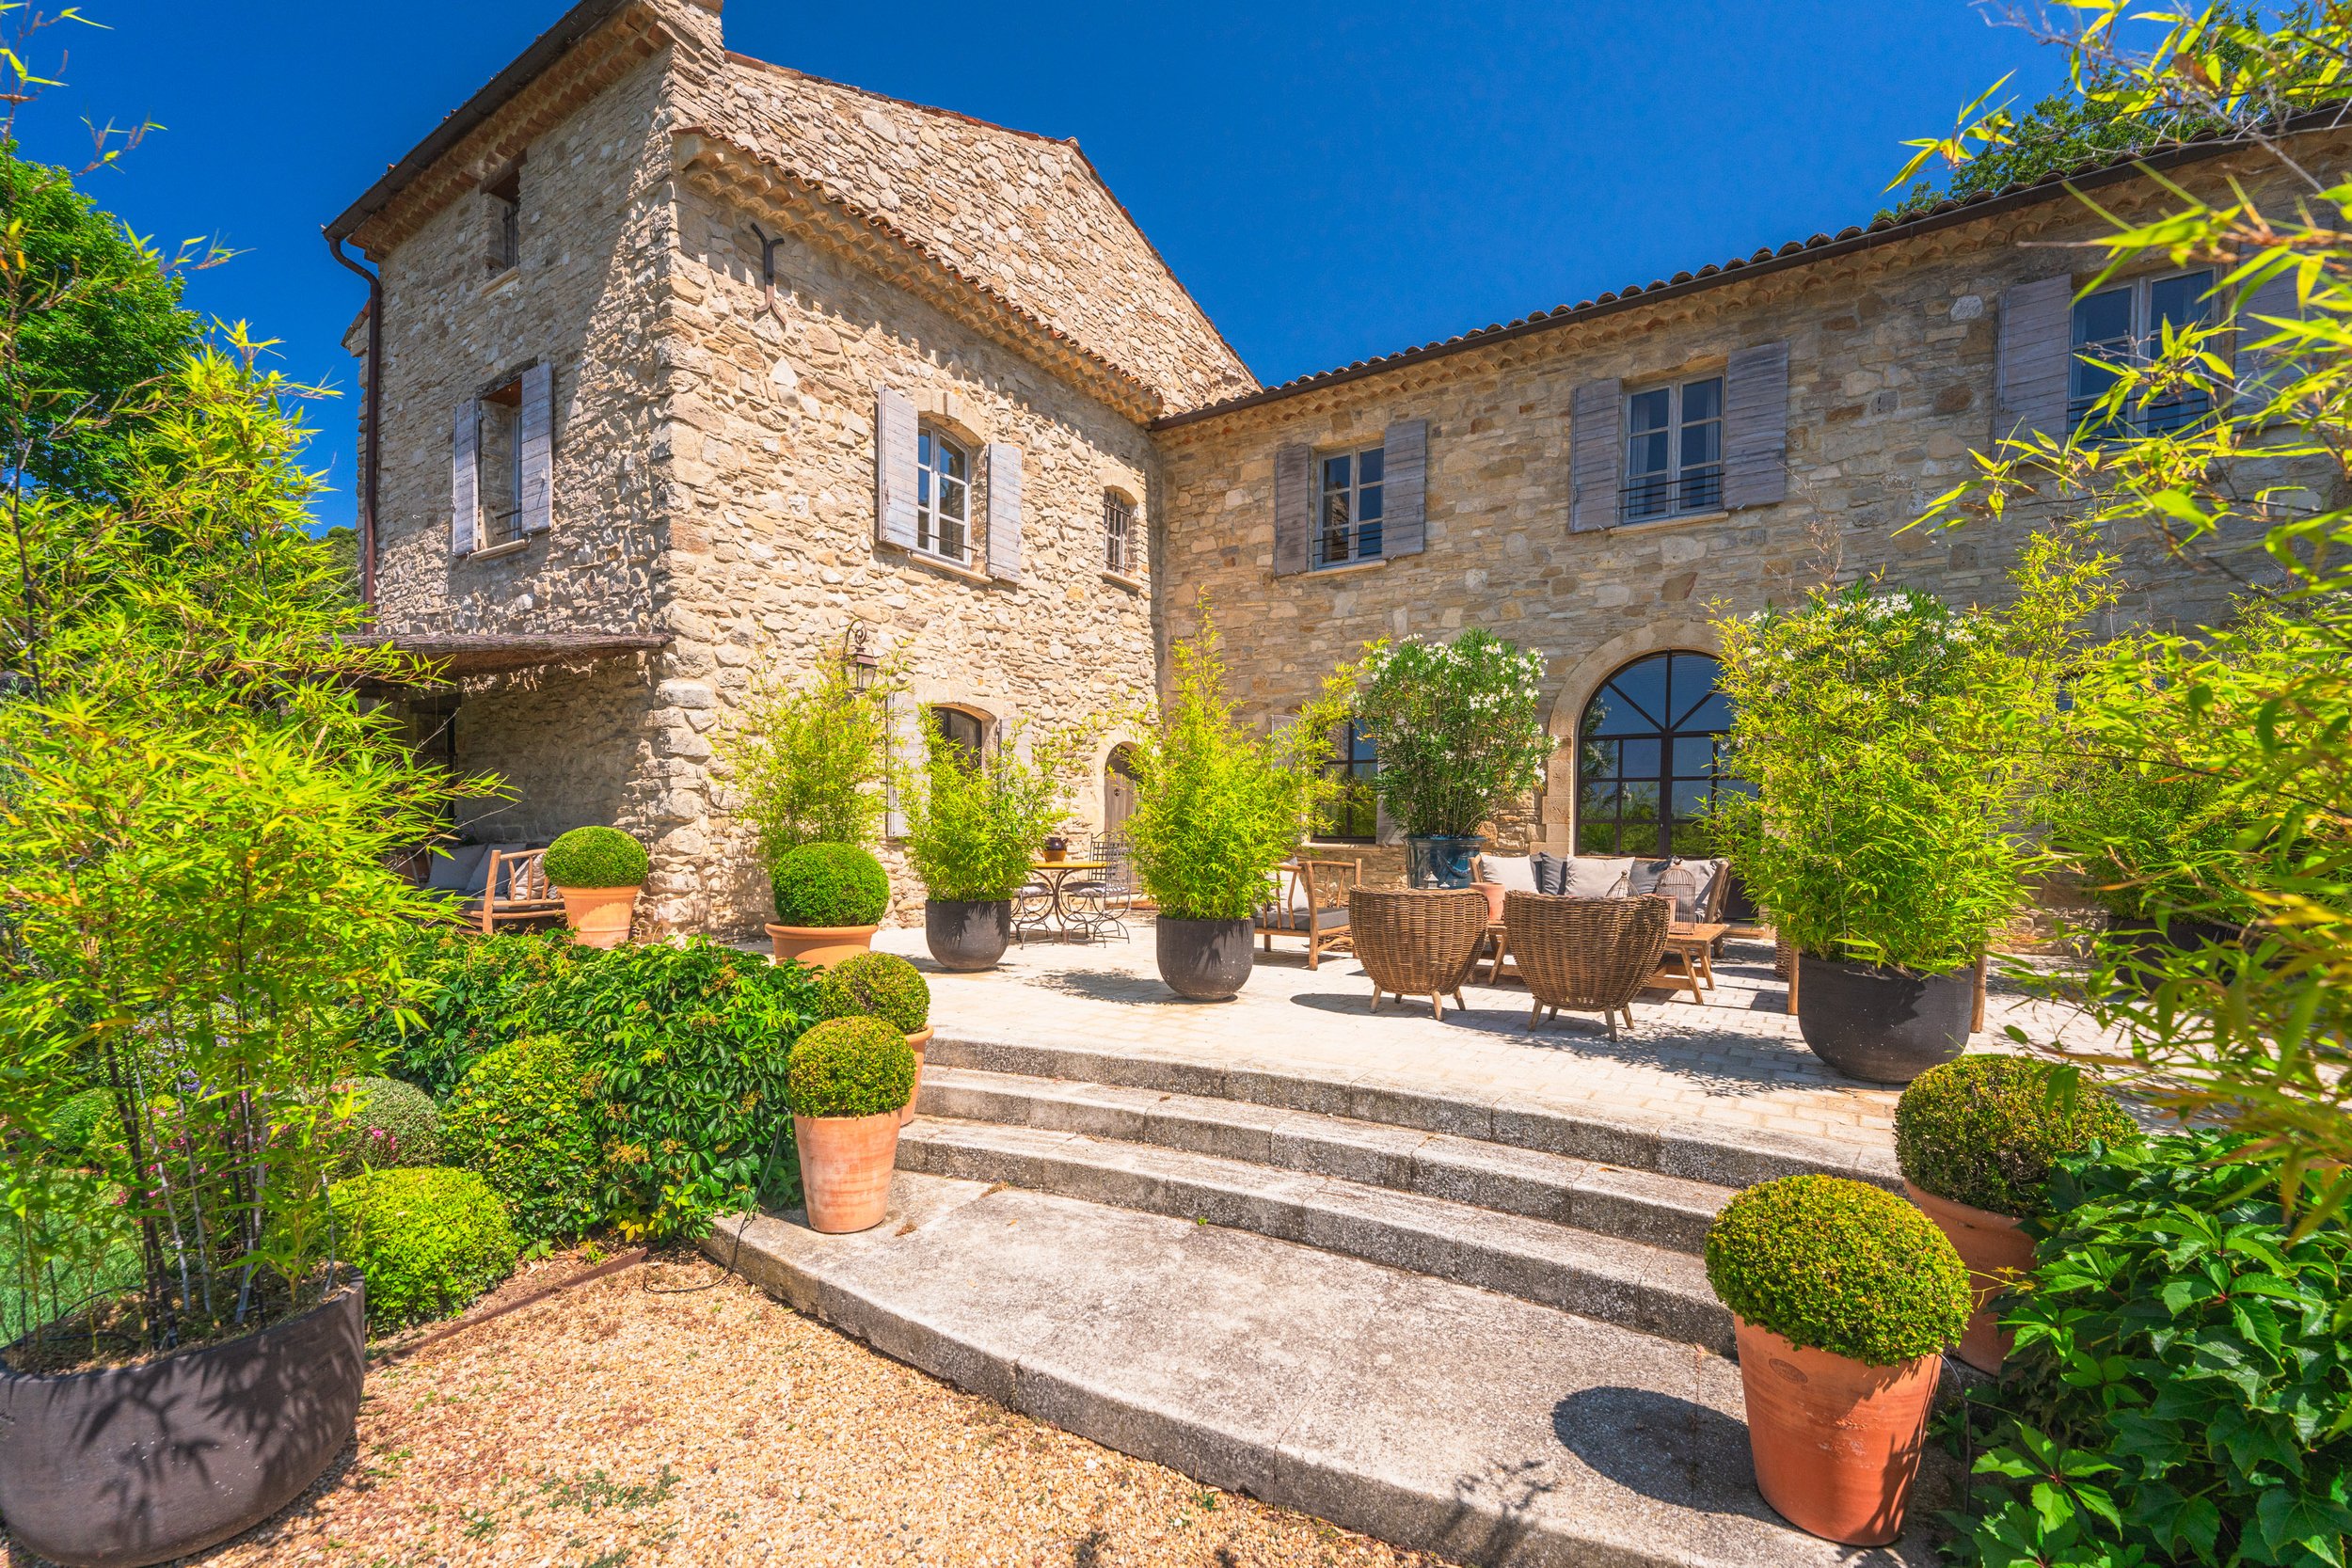 Francis+York+French Country Estate in the South Luberon 00004.jpg